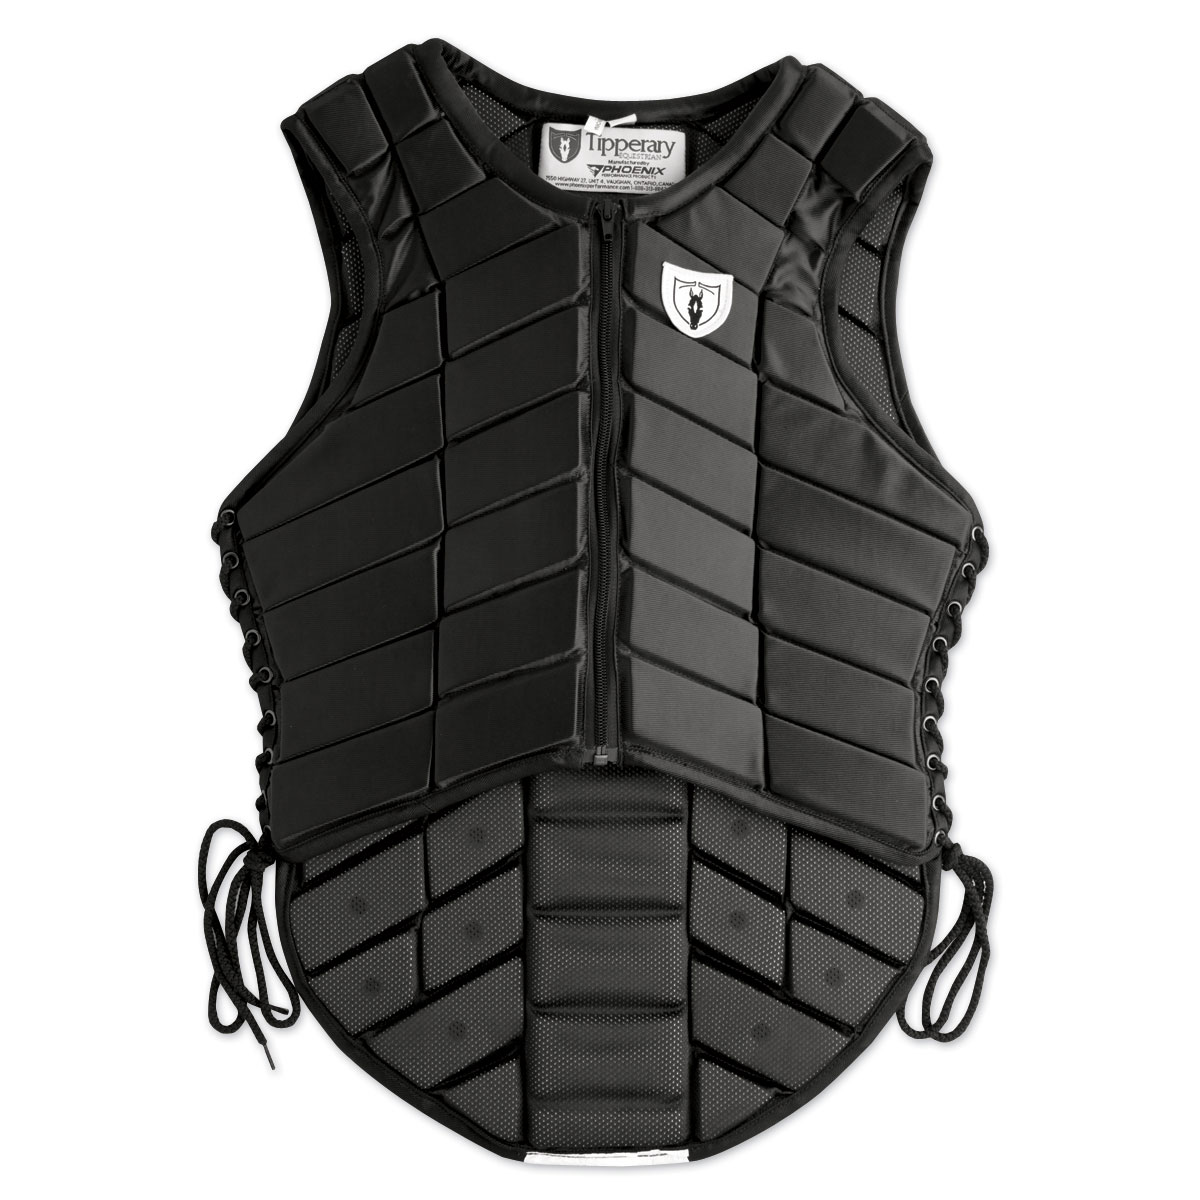 Eventer English Style Protective Horseback Riding Apparel TIPPERARY EQUESTRIAN Horse Riding Eventing Vest Flexible Customizable Fit Body Protector 